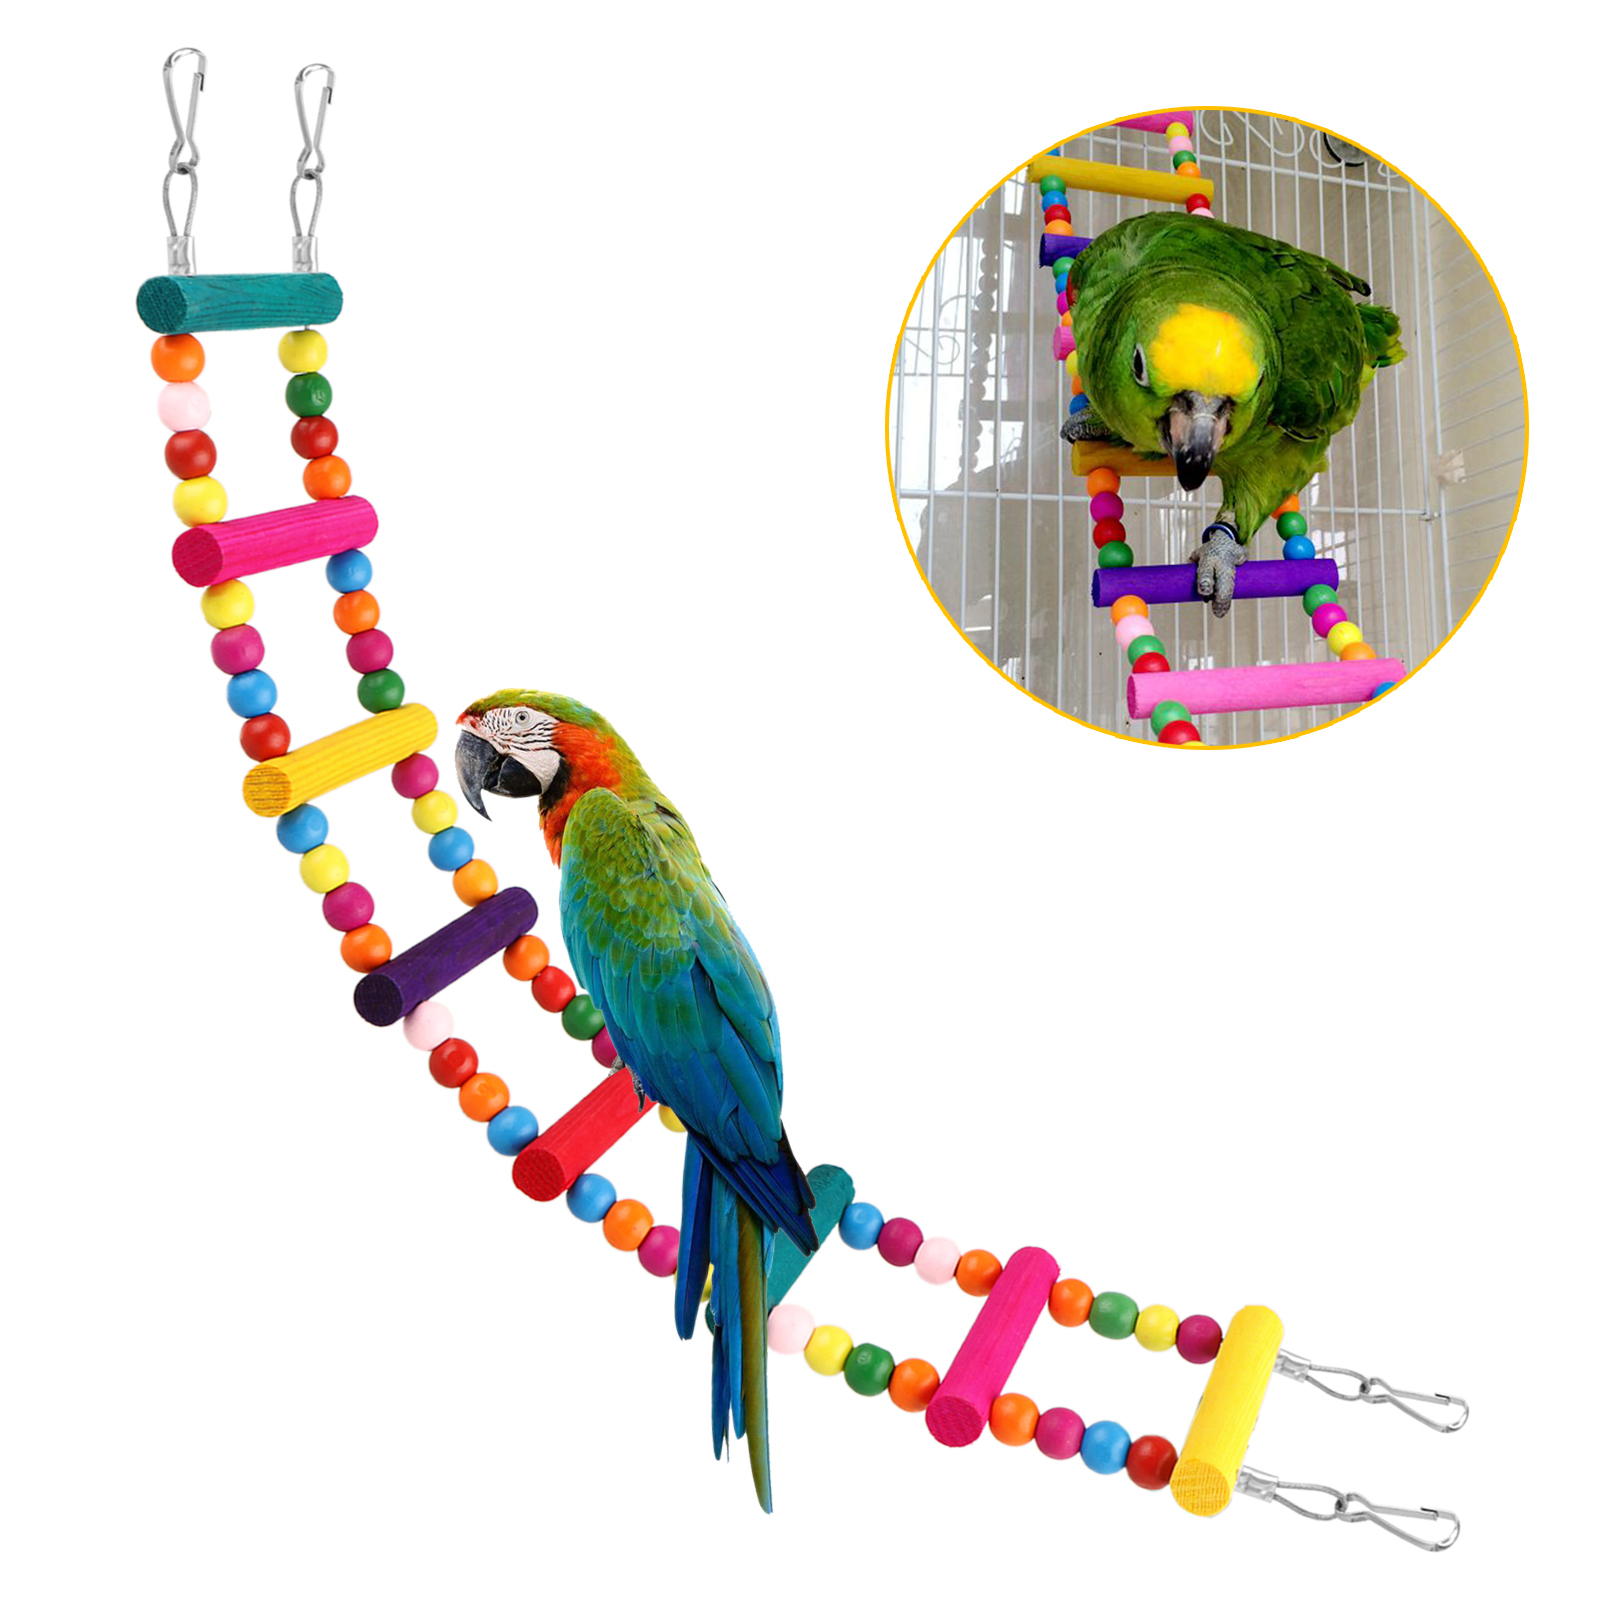 WHALE LEAPING 12 Pcs Bird Parrot Swing Chewing Toys,Hanging Bell Birds Cage Toys,Colorful Chewing Hanging Swing Pet Bird Toy with Bells,Wooden Ladder Hammock,Rope Perch,Birdcage Stands Parakeets